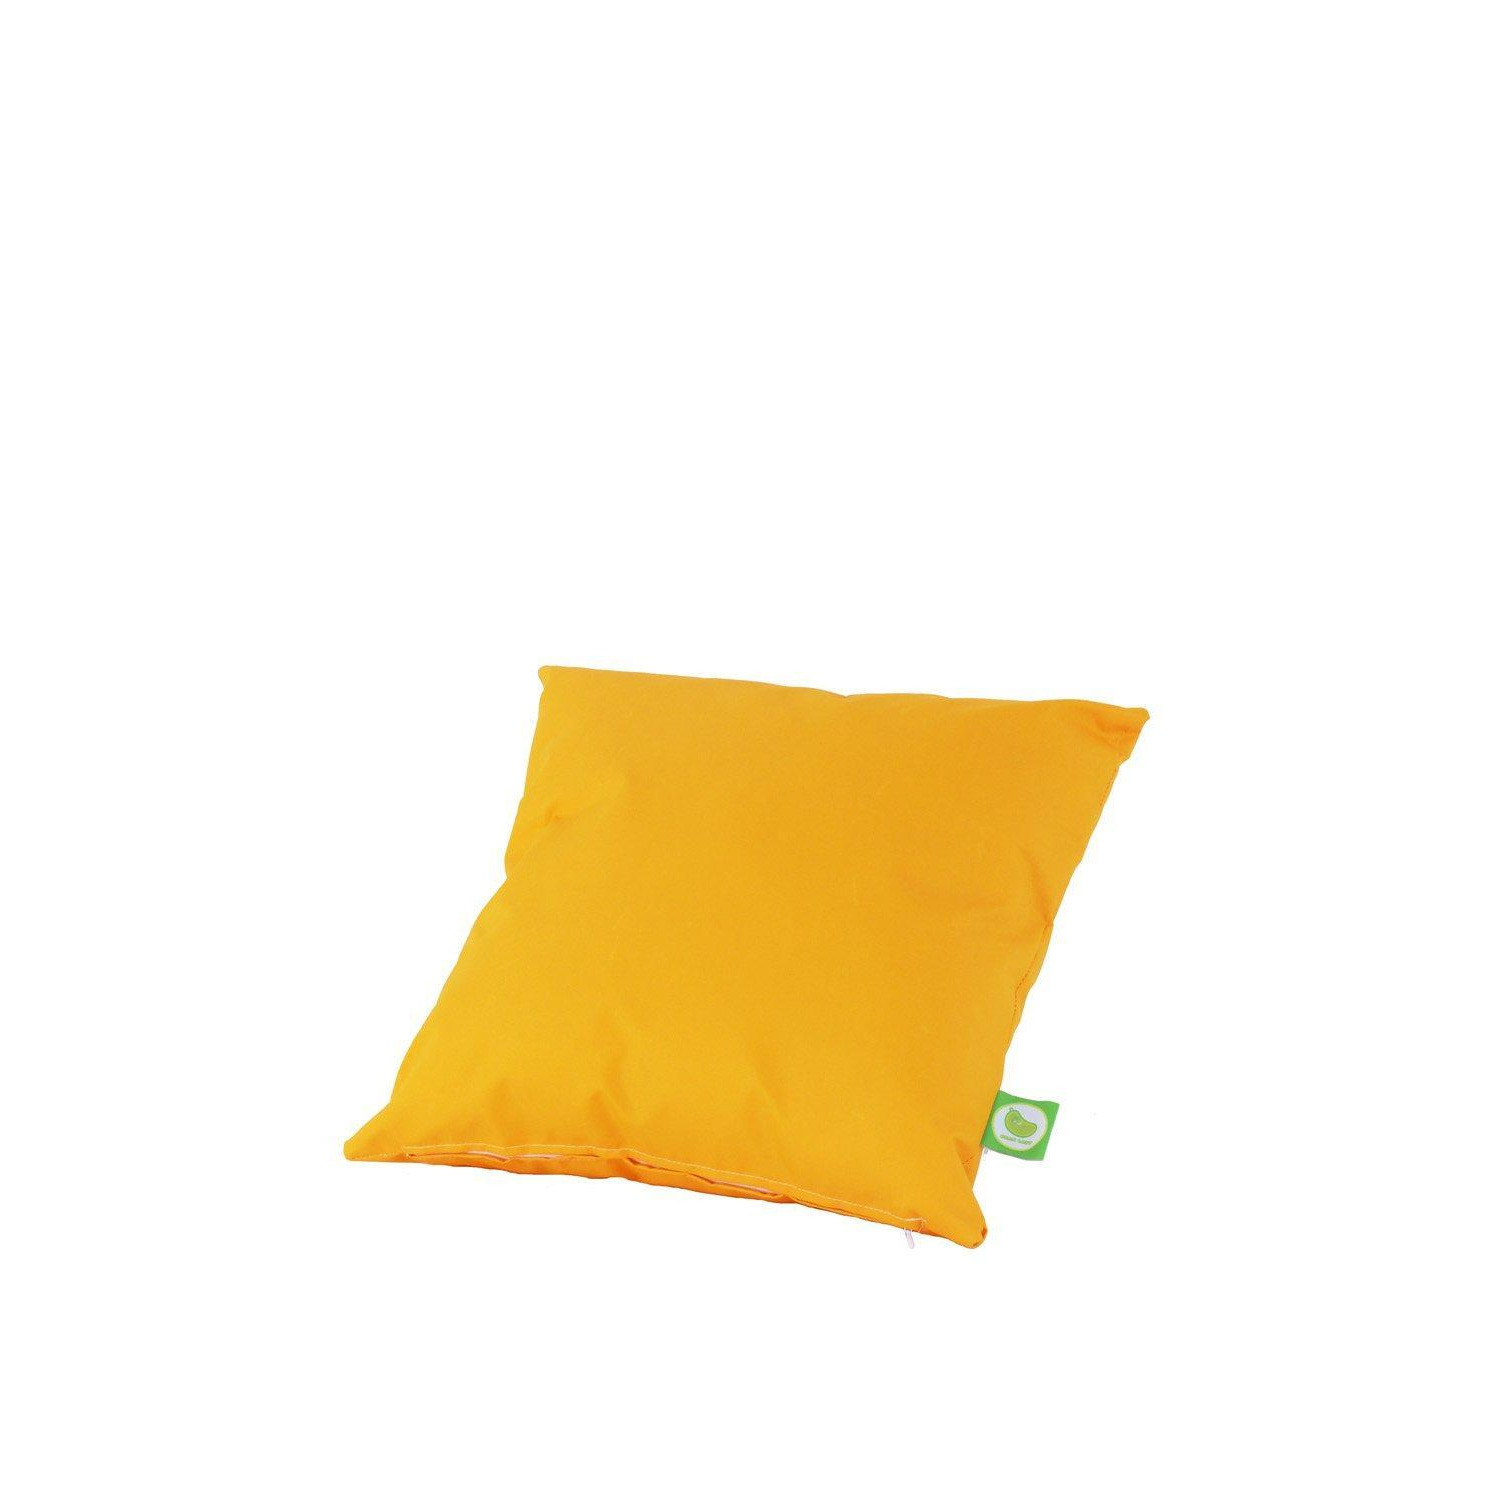 Yellow Outdoor Garden Furniture Seat Scatter Cushion with Pad - image 1